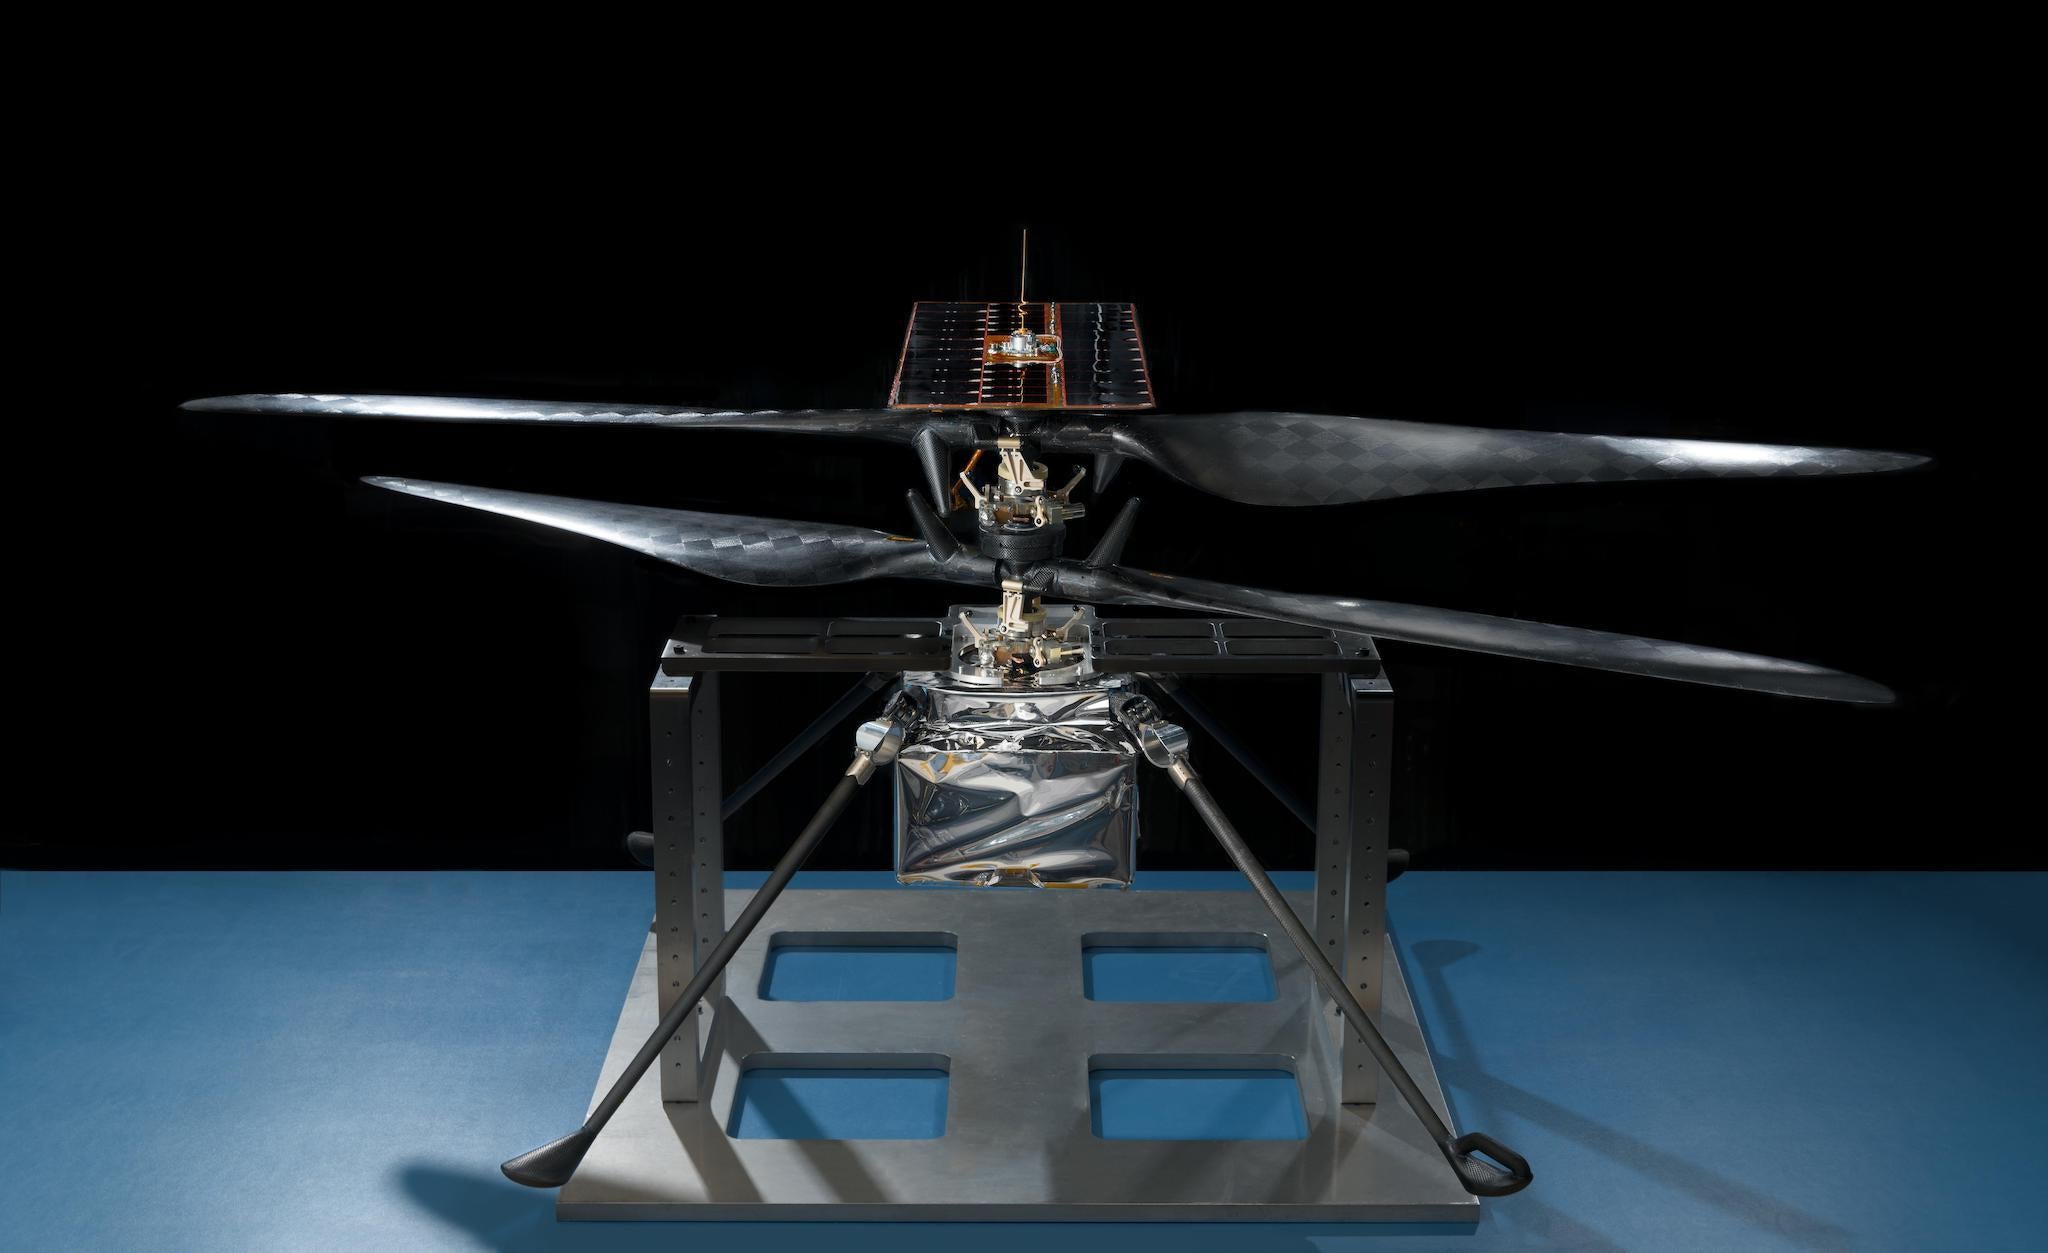 This image of the flight model of NASA's Mars Helicopter was taken on Feb. 14, 2019, in a cleanroom at NASA's Jet Propulsion Laboratory in Pasadena, California